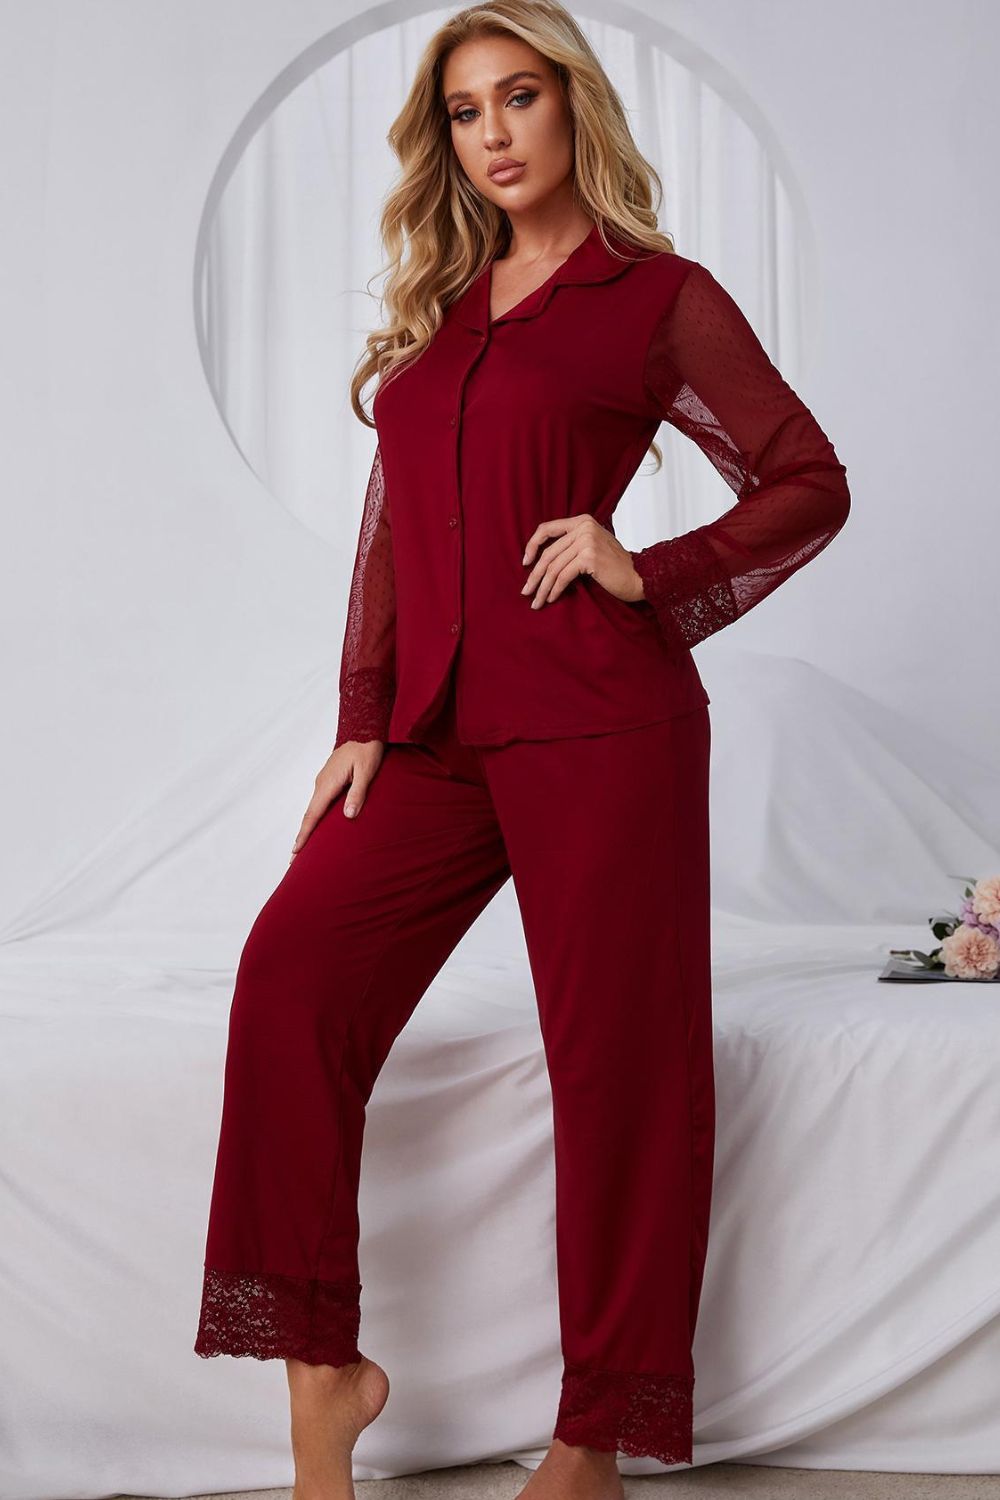 Spliced Lace Lapel Collar Pajama Set Print on any thing USA/STOD clothes